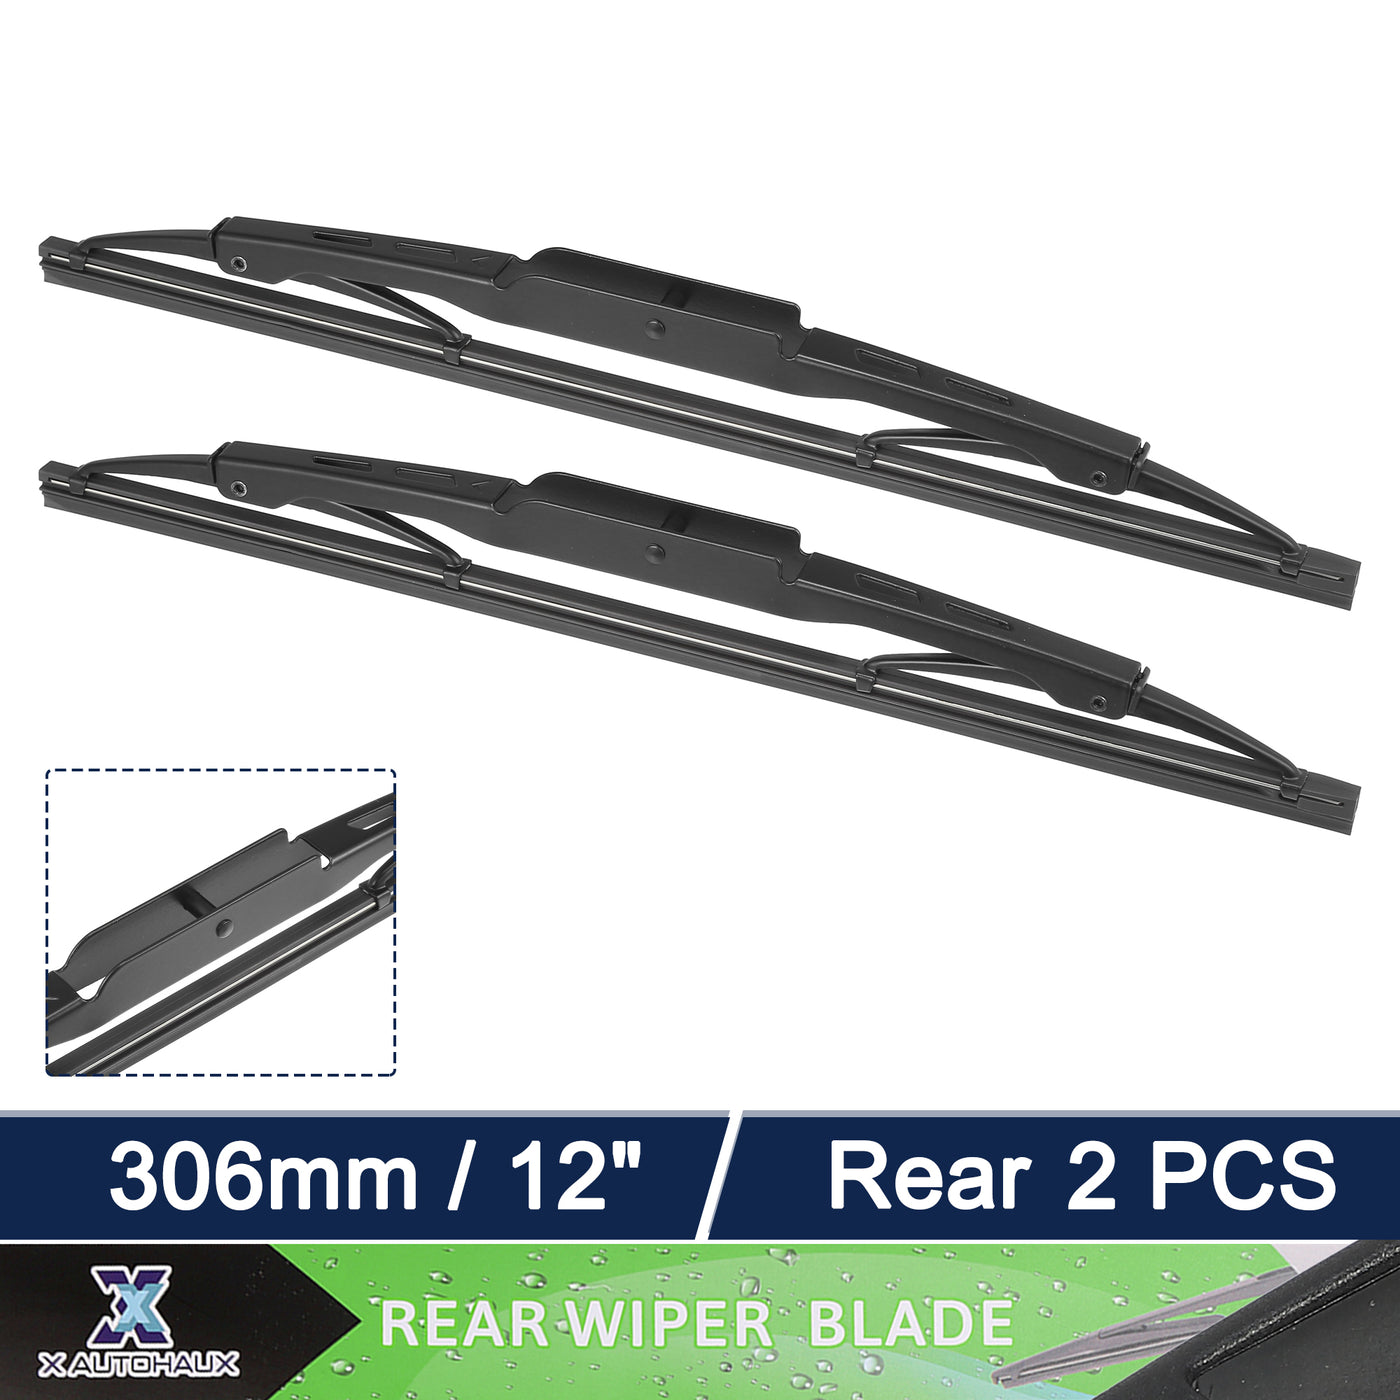 X AUTOHAUX 2pcs Rear Windshield Wiper Blade Replacement for Hyundai Tucson 2004-2010 for Kia Sportage 2004-2010 for Chevrolet Captiva 2006-2020